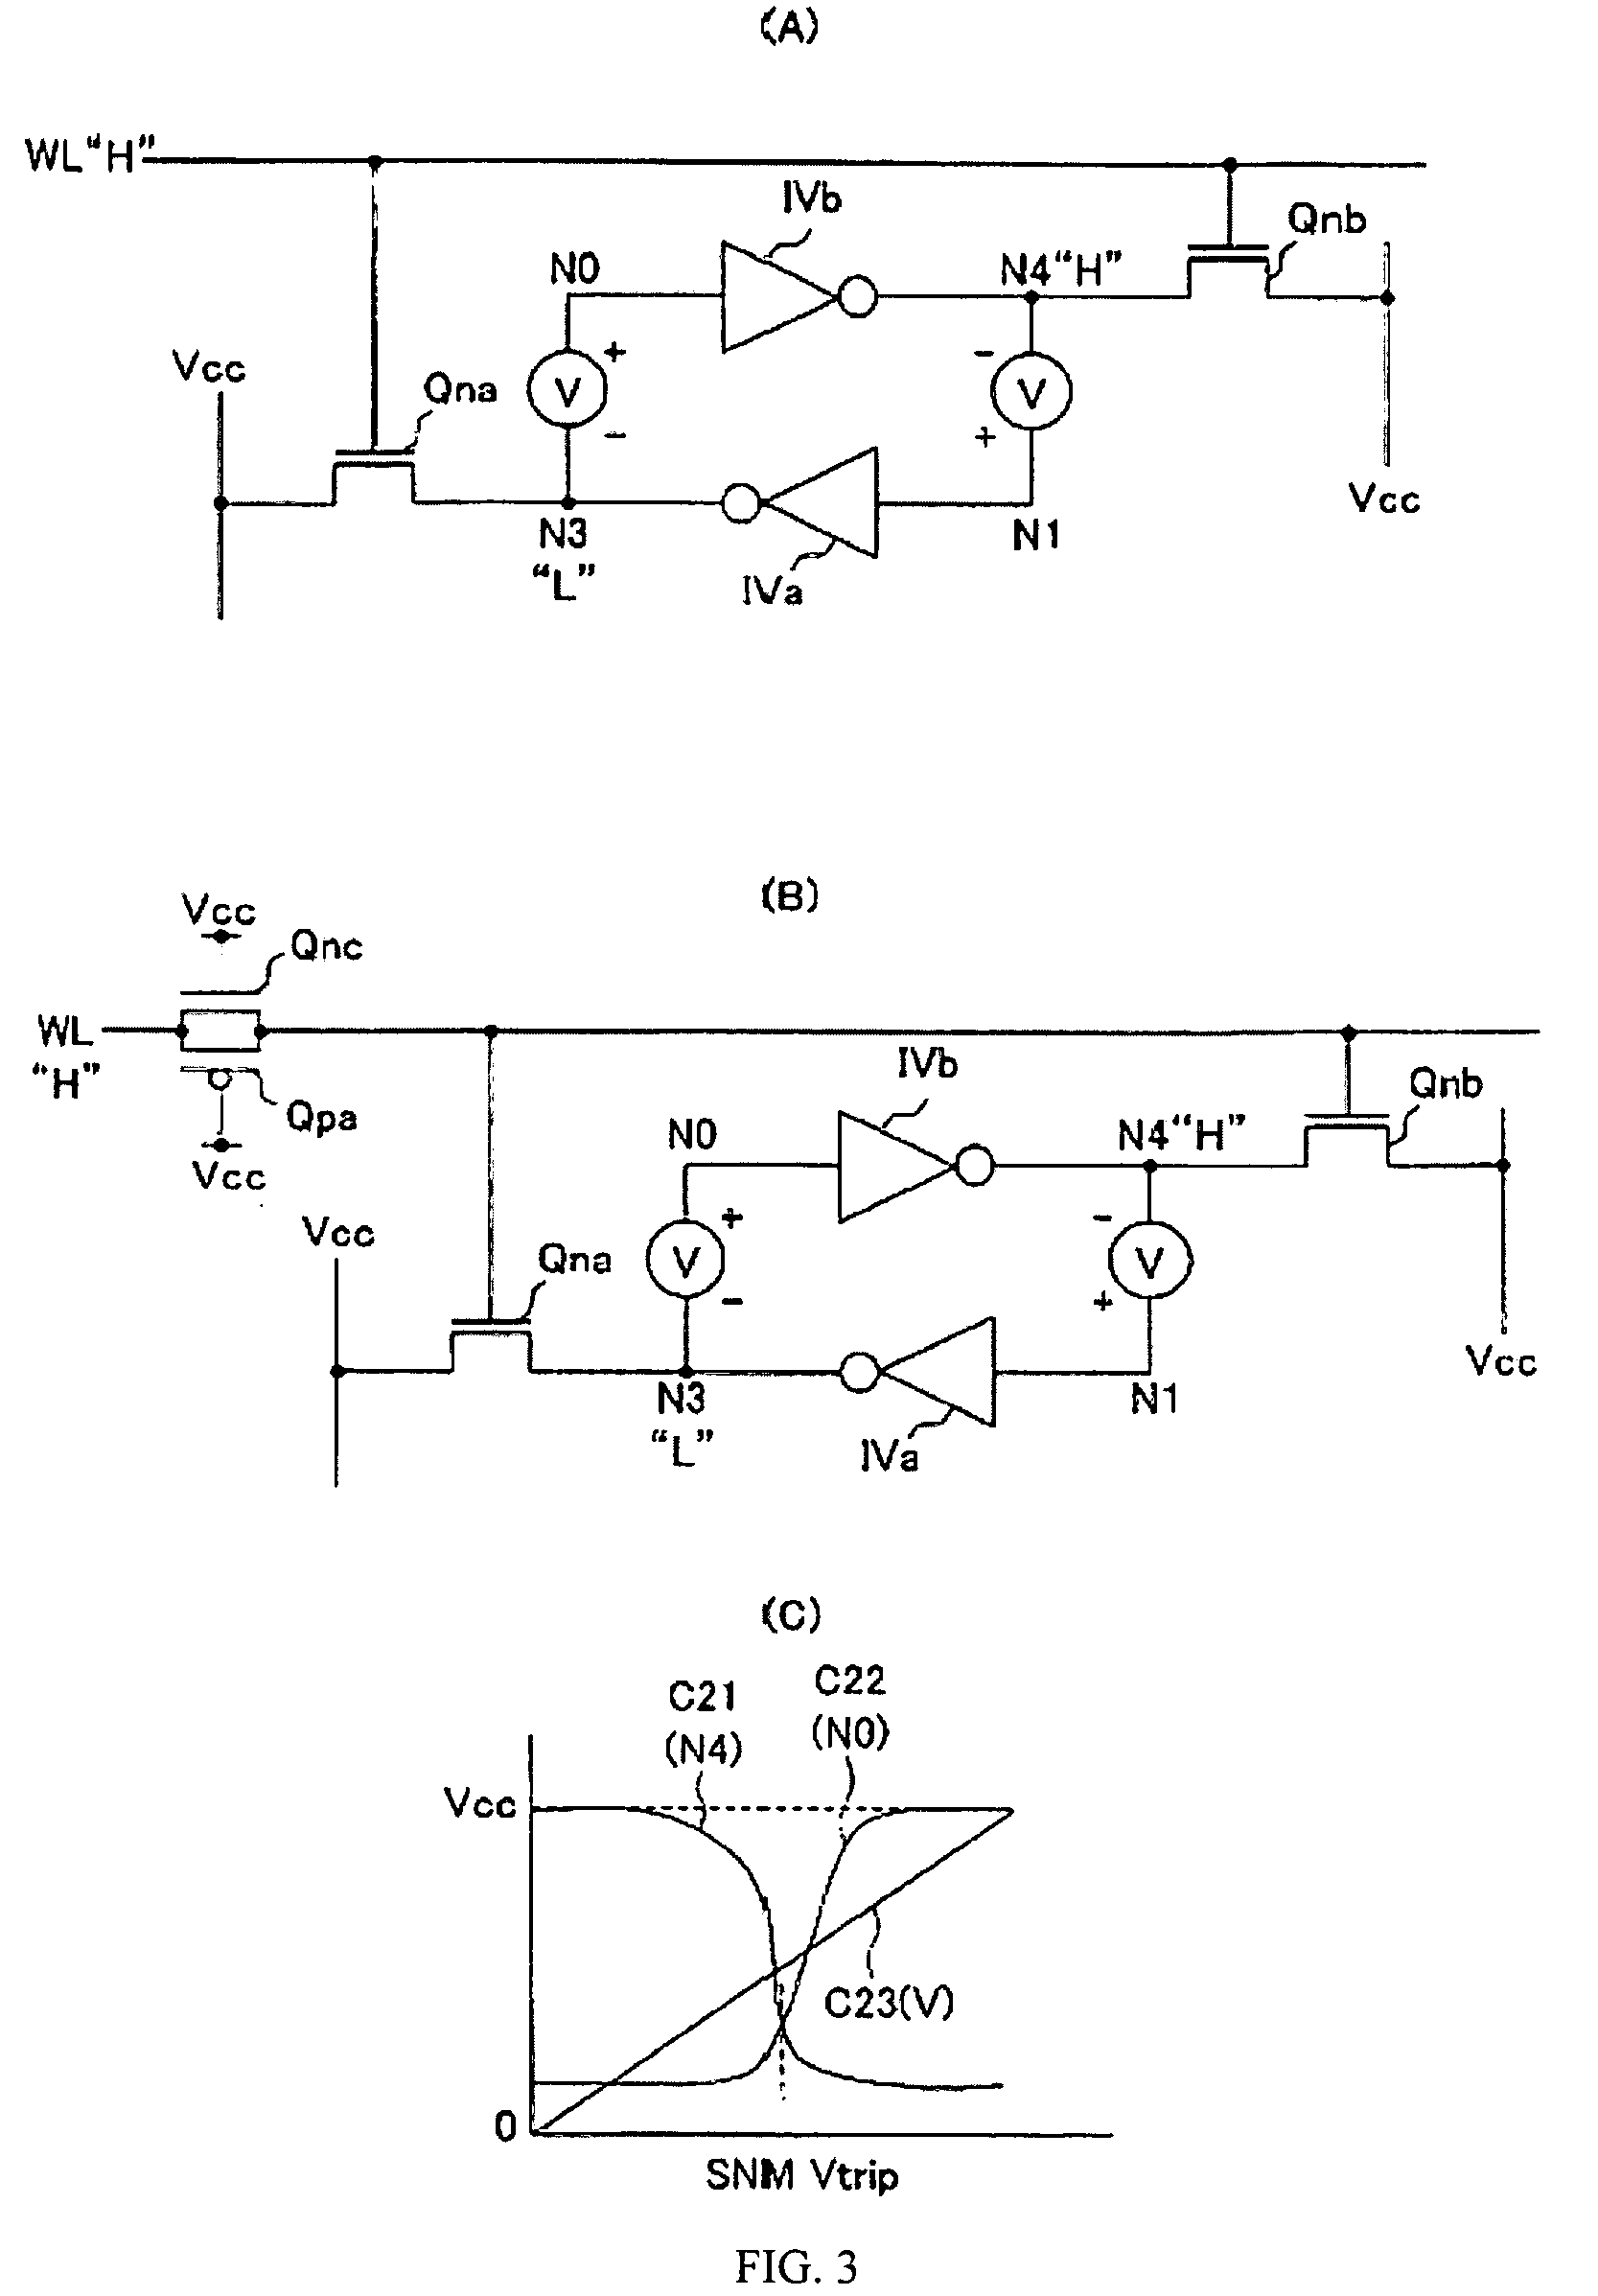 Static memory cell and SRAM device